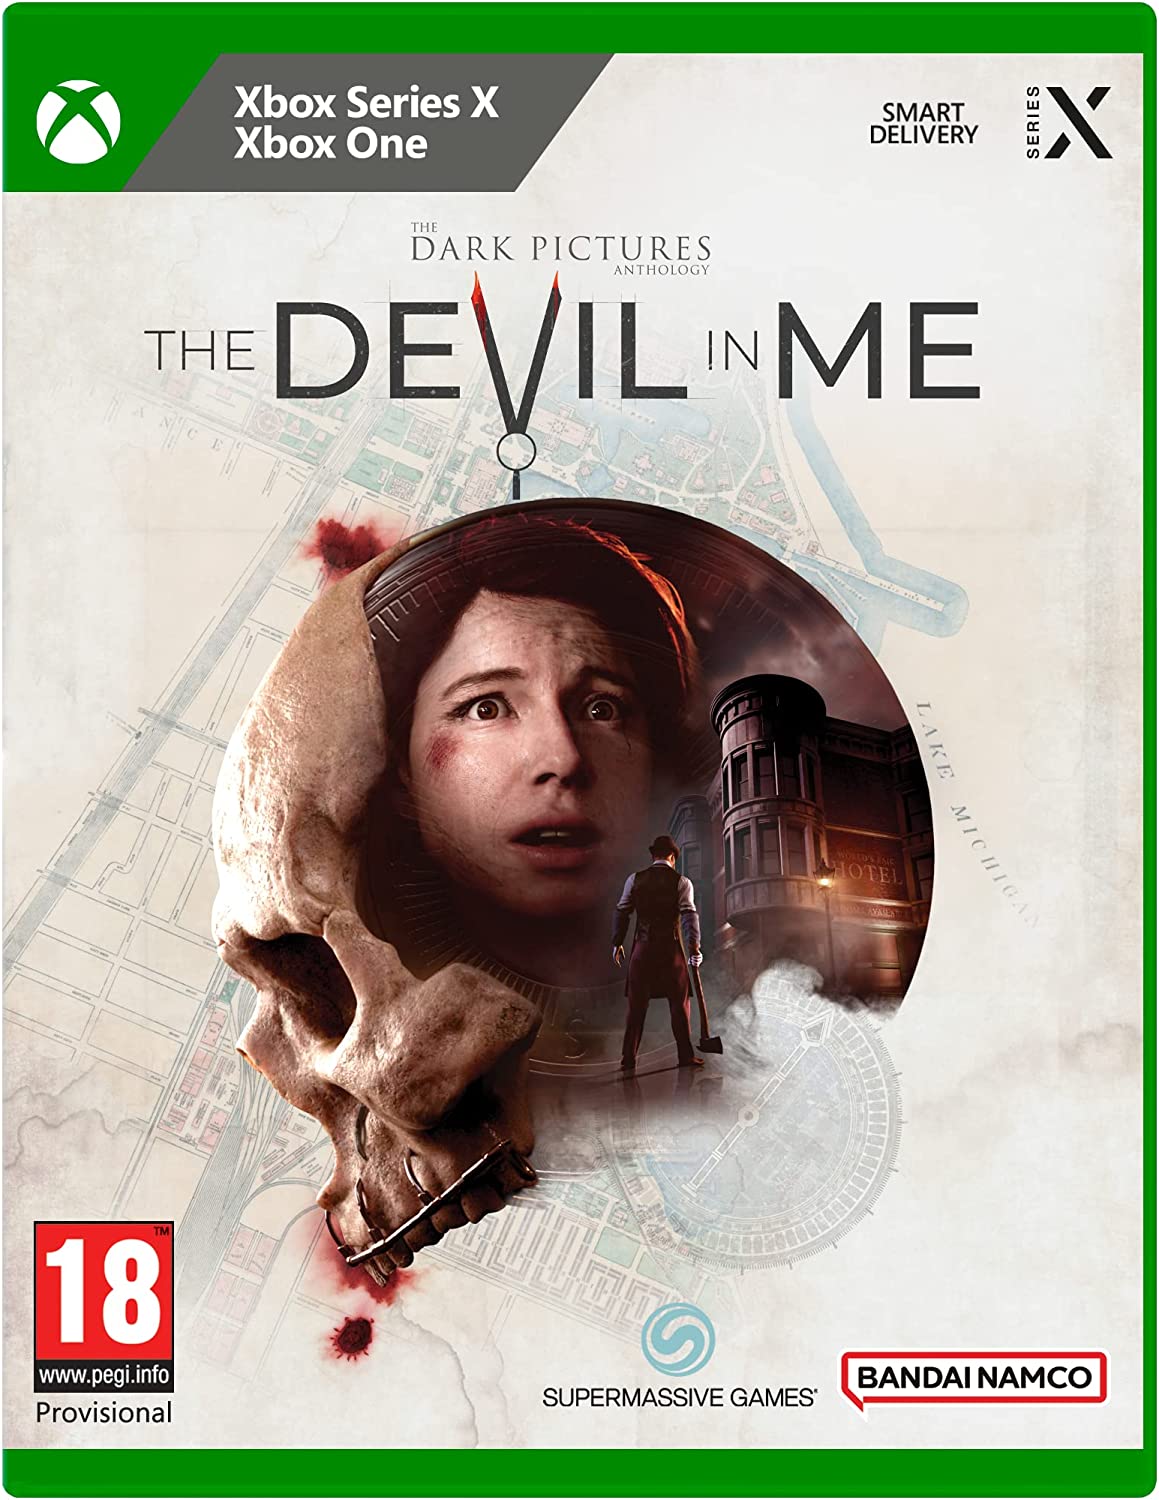 The Dark Pictures Anthology: The Devil In Me (Xbox Series X)